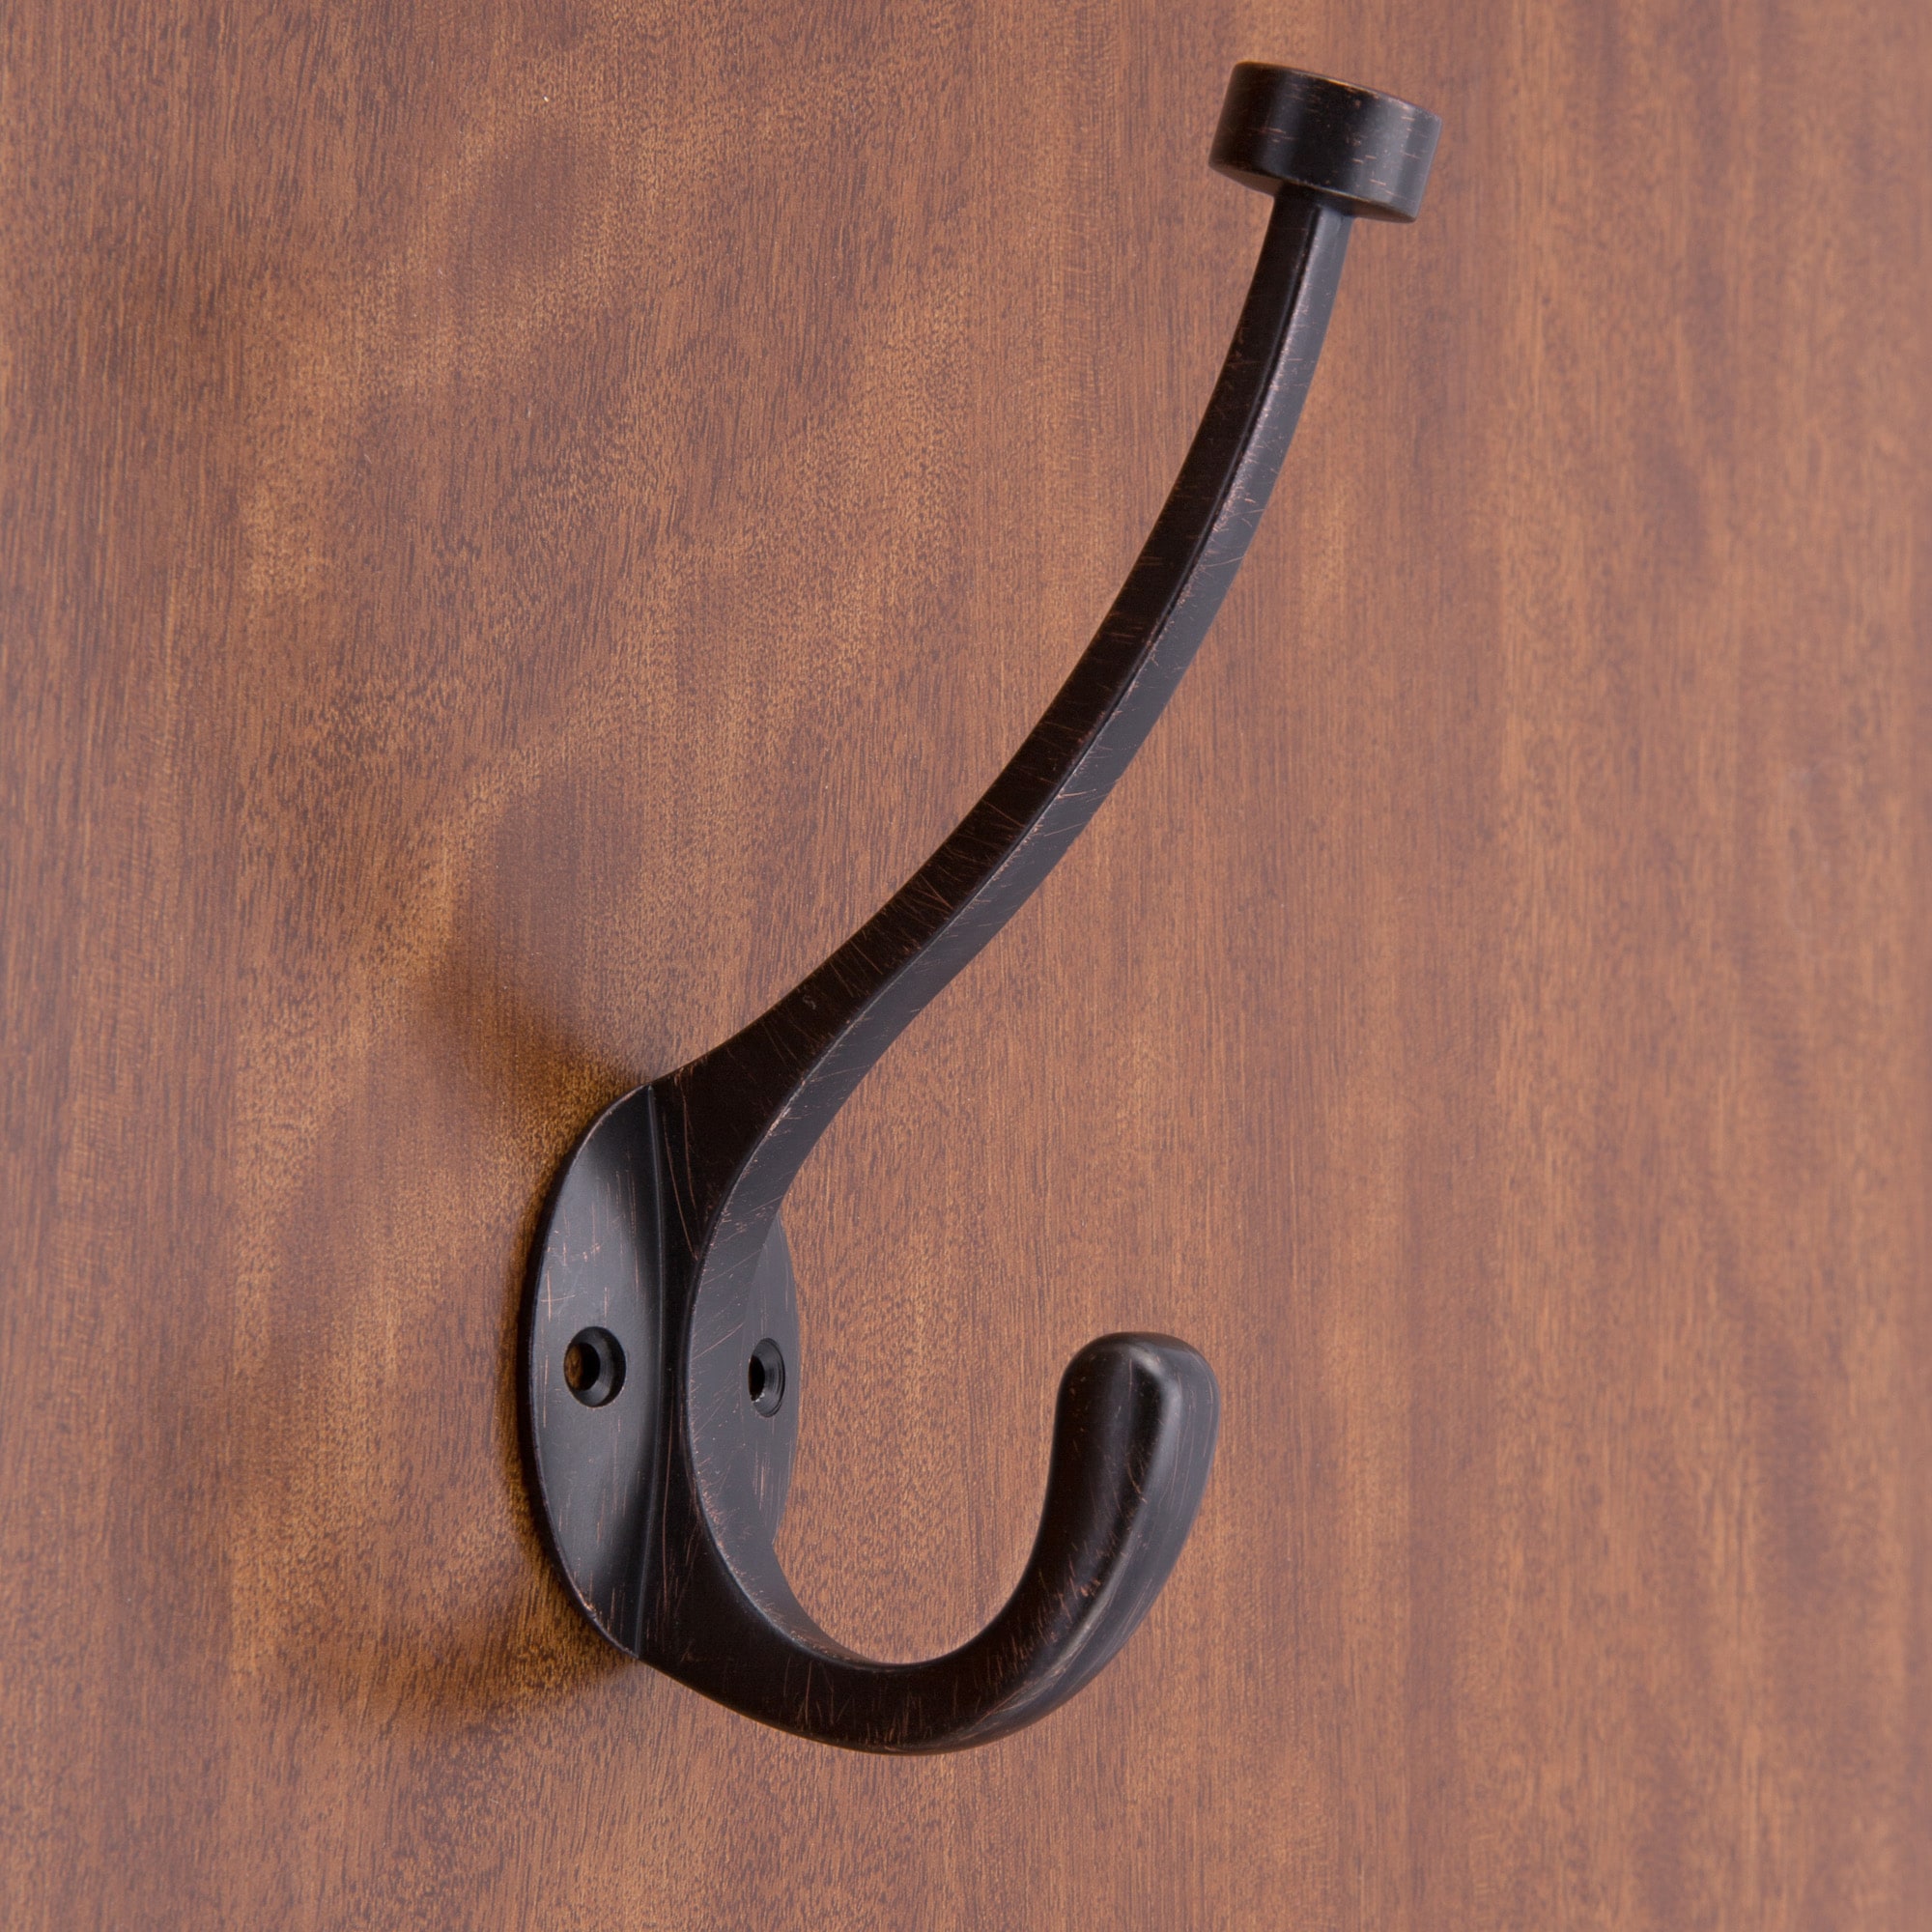 ProSource H62-B076 Coat and Hat Hook, 22 lb, 2-Hook, 1 in Opening